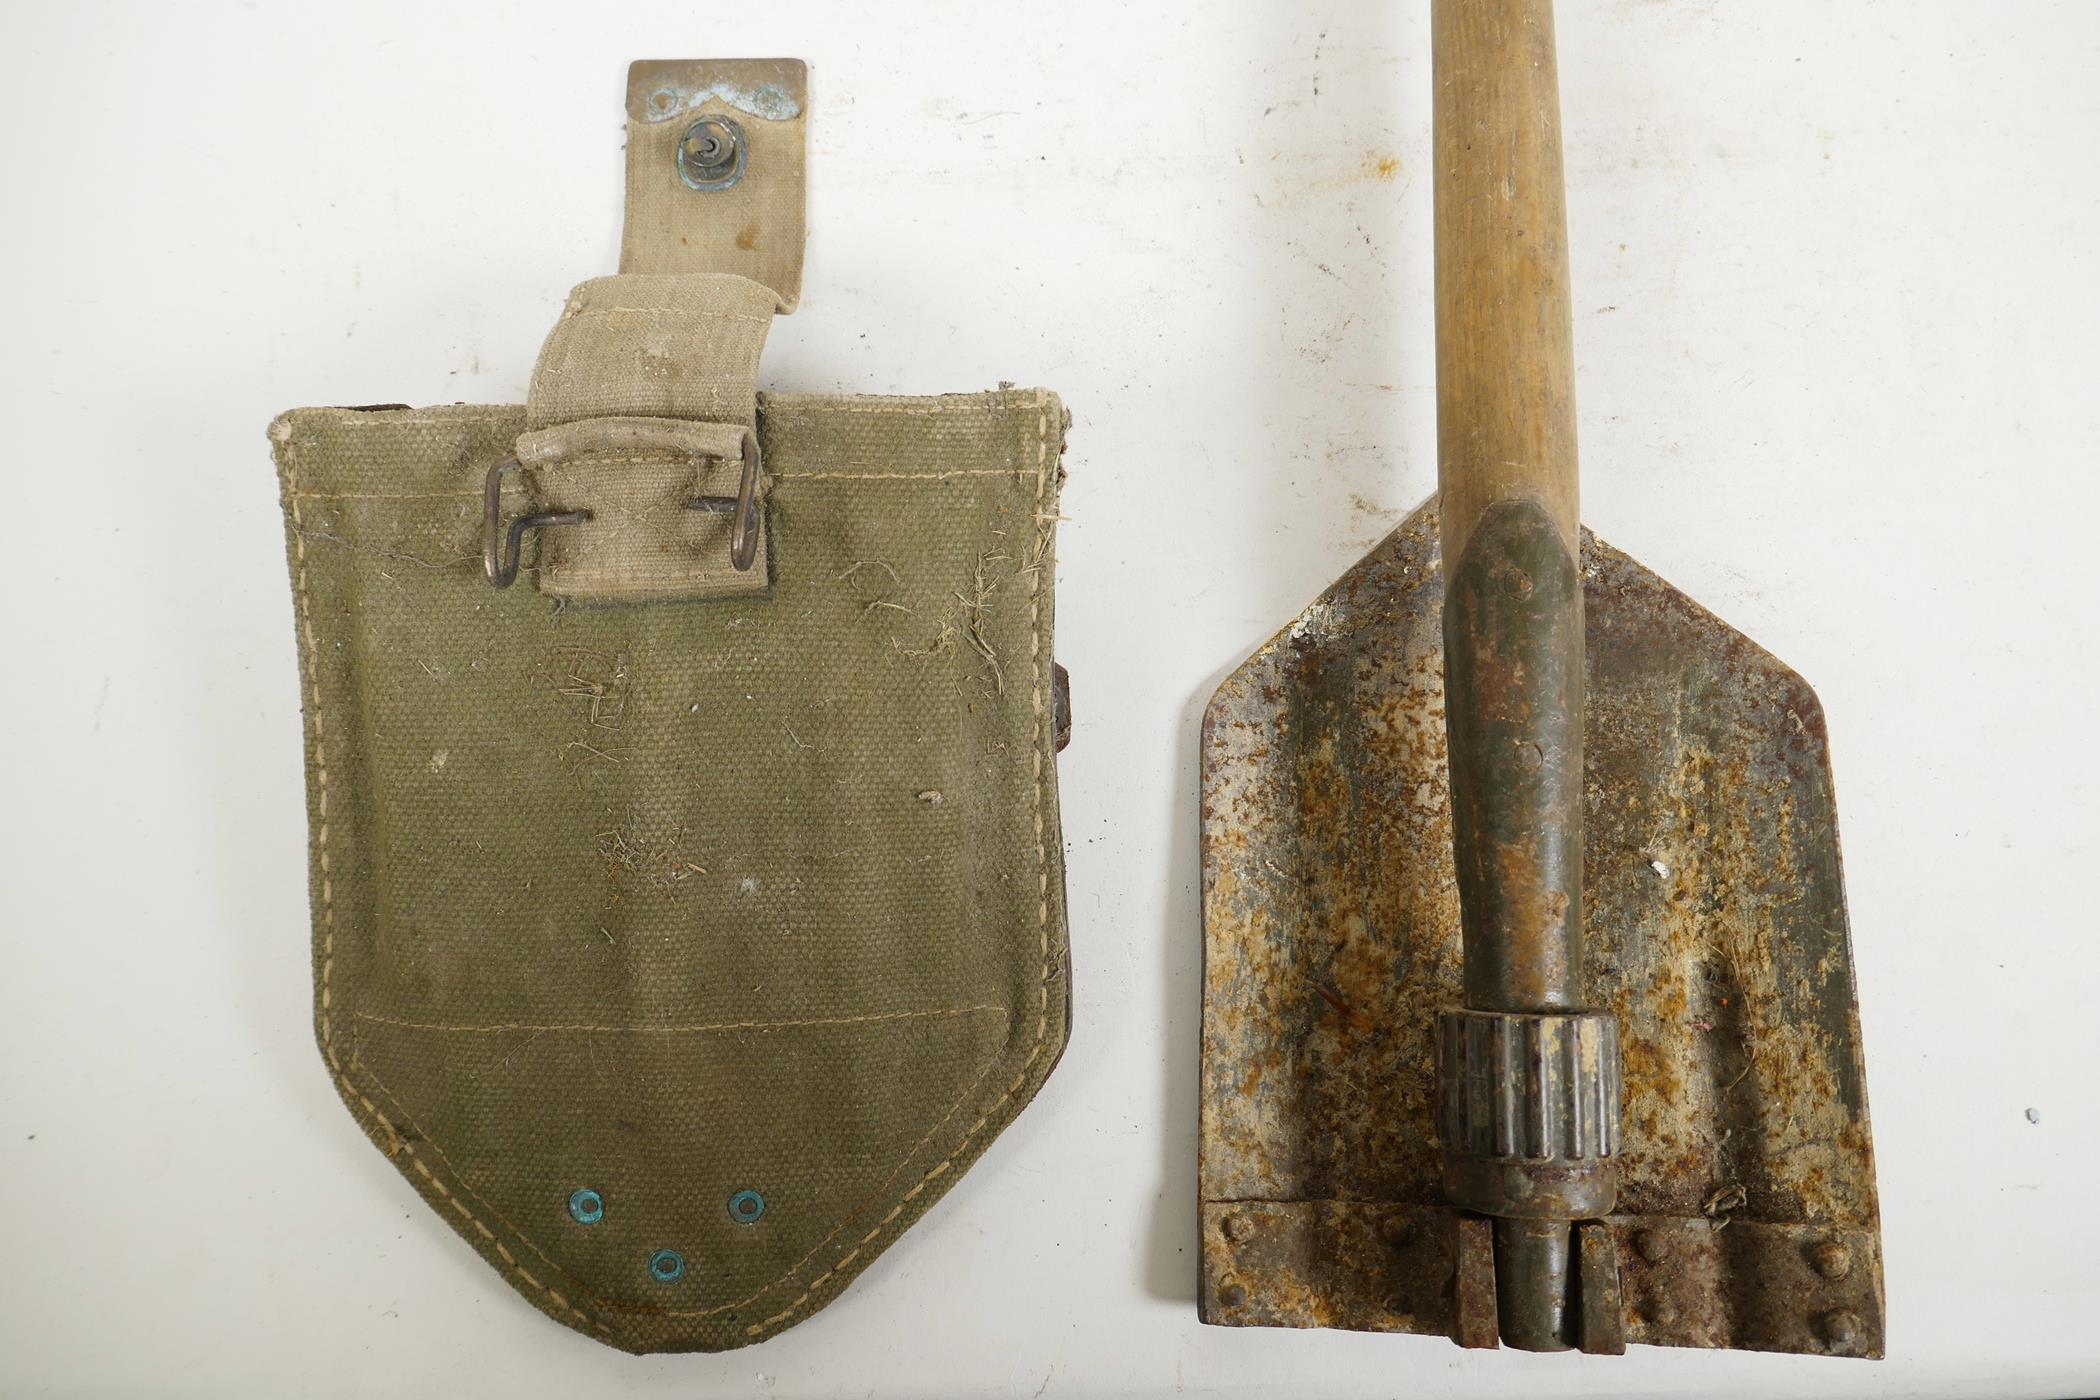 A Russian Special Forces military issue folding shovel, from the 'Vityaz', a unit of the Ministry of - Image 4 of 8